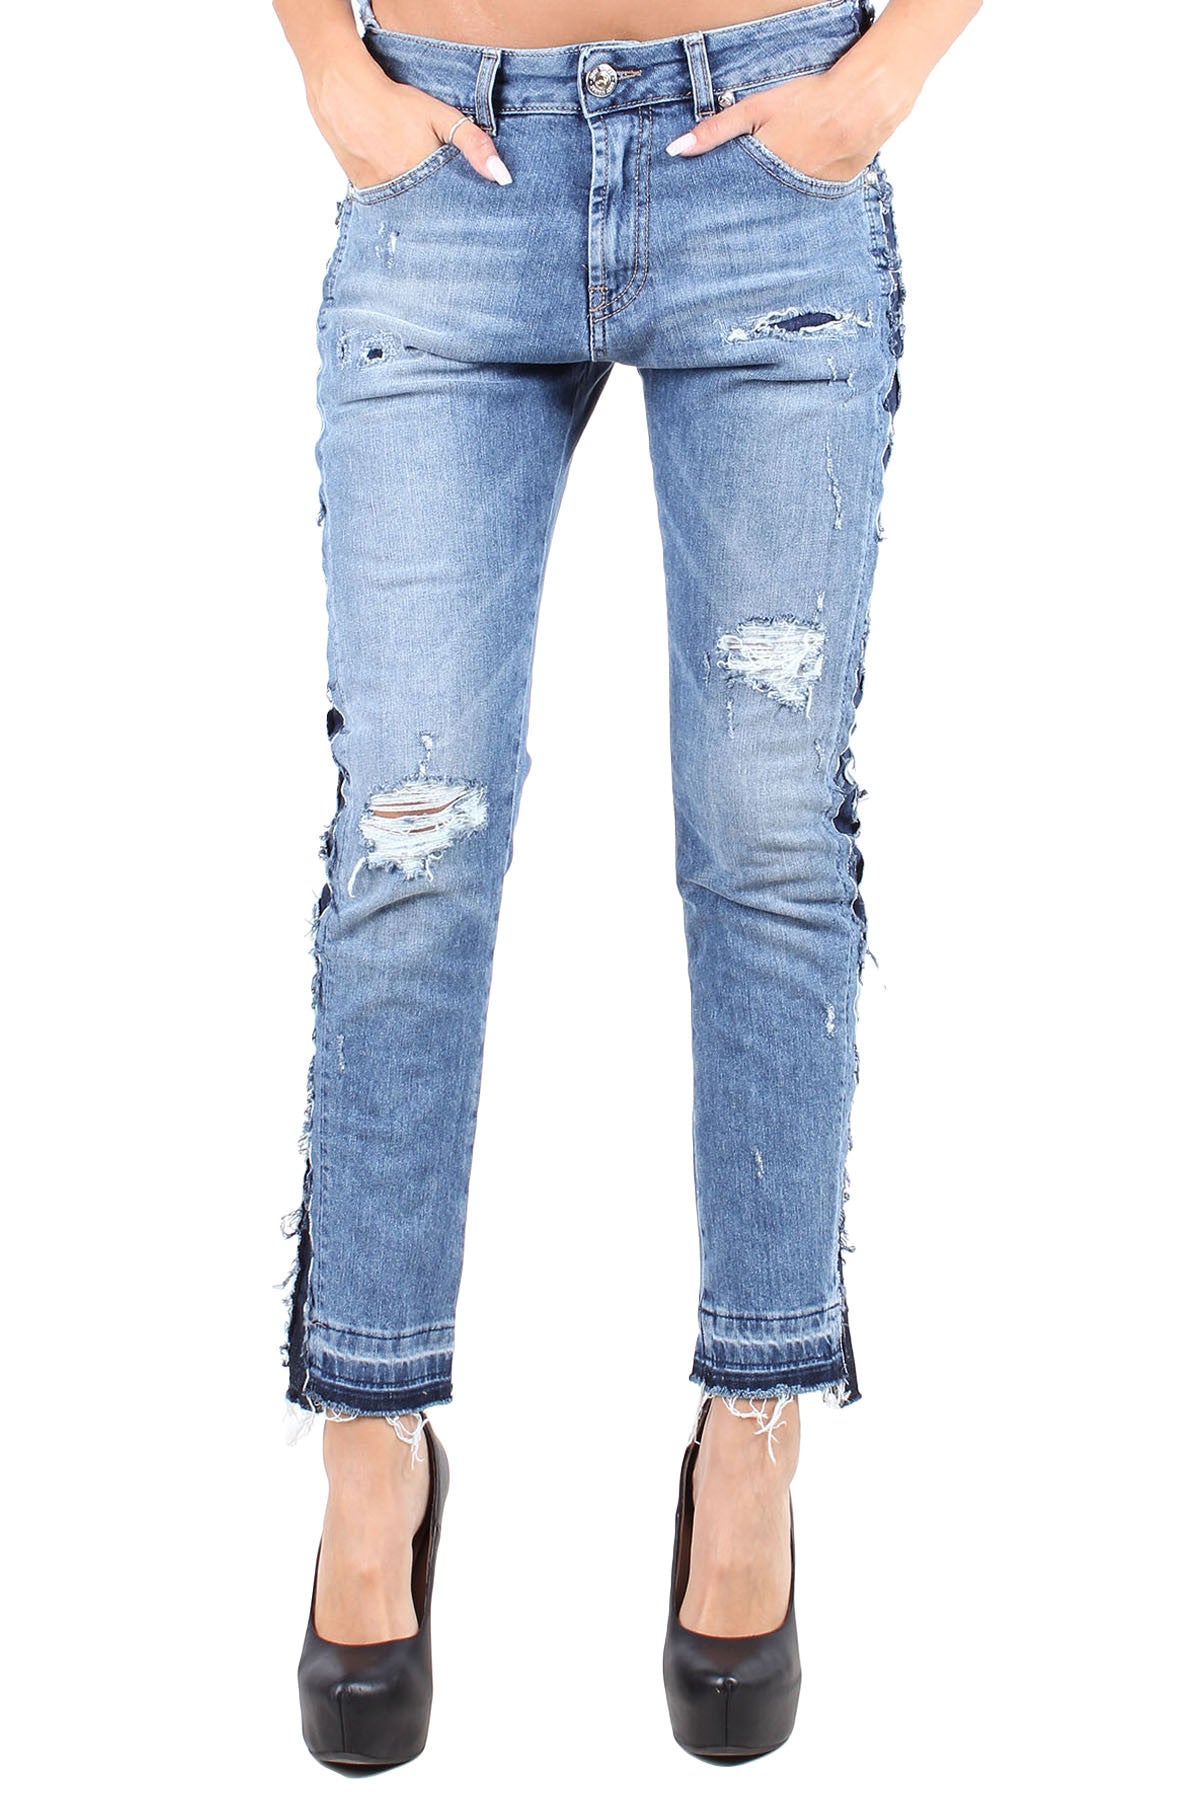 Sexy Woman Jeans Donna